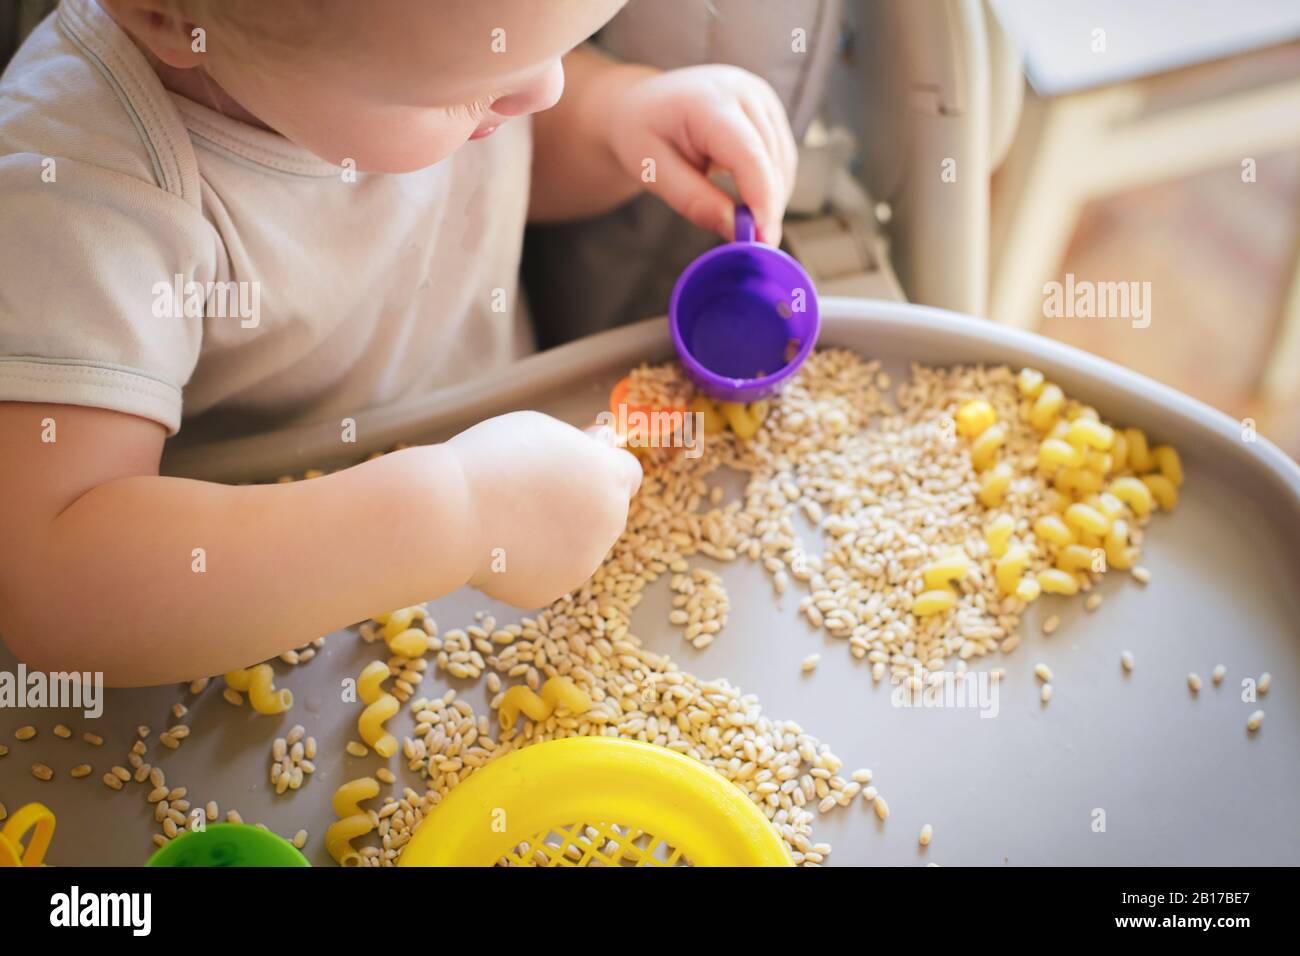 https://c8.alamy.com/comp/2B17BE7/small-kid-pours-toy-yellow-spoon-ful-in-cup-games-with-products-walfdorfs-method-of-child-development-teaching-children-to-eat-independently-deve-2B17BE7.jpg